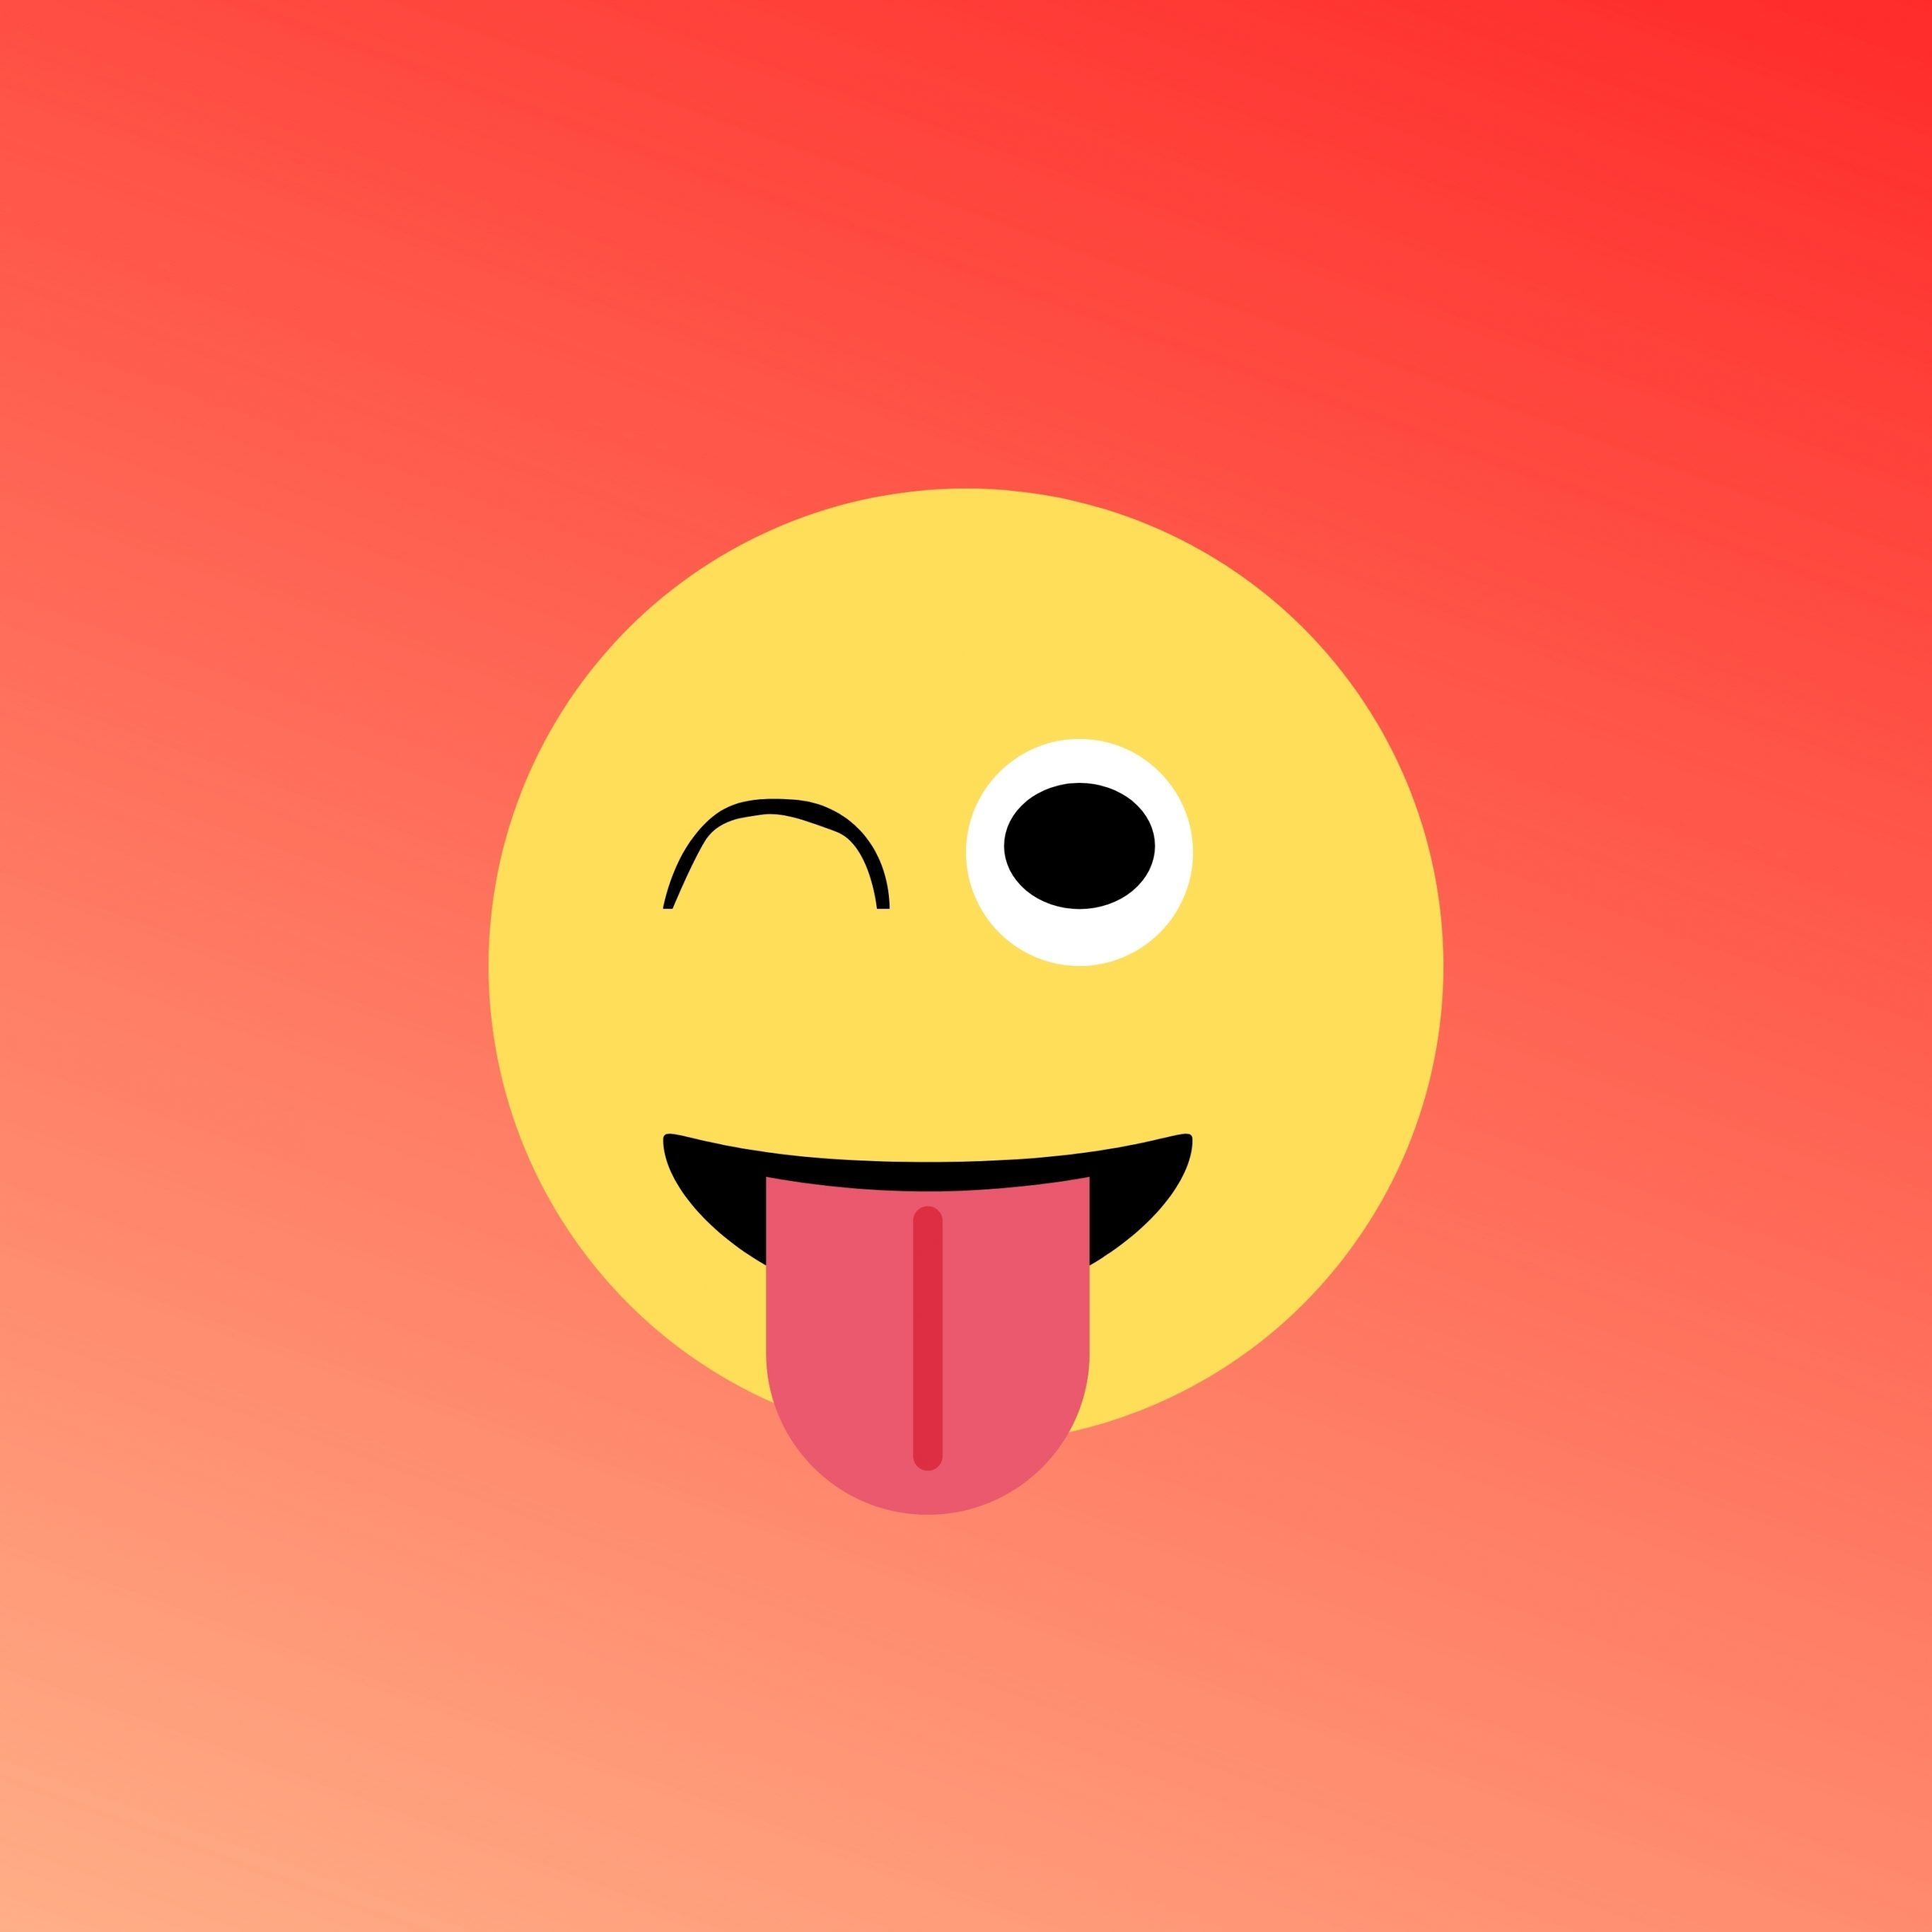 iPad Pro 12.9 wallpapers Winking Face Tongue Red Background iPad Wallpaper